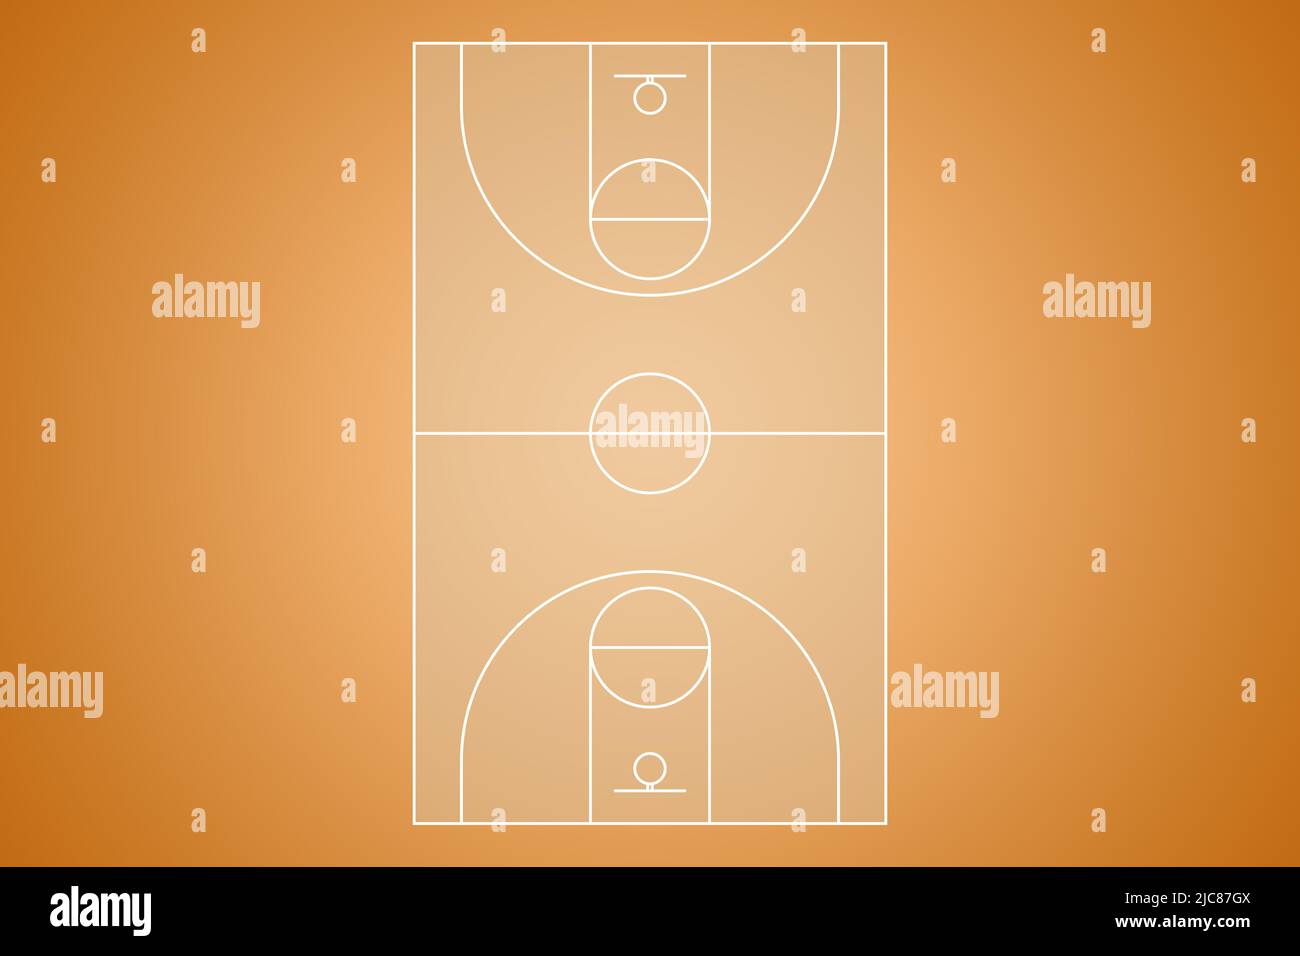 Basketball court limits. Top view from above from basketball field line Stock Photo